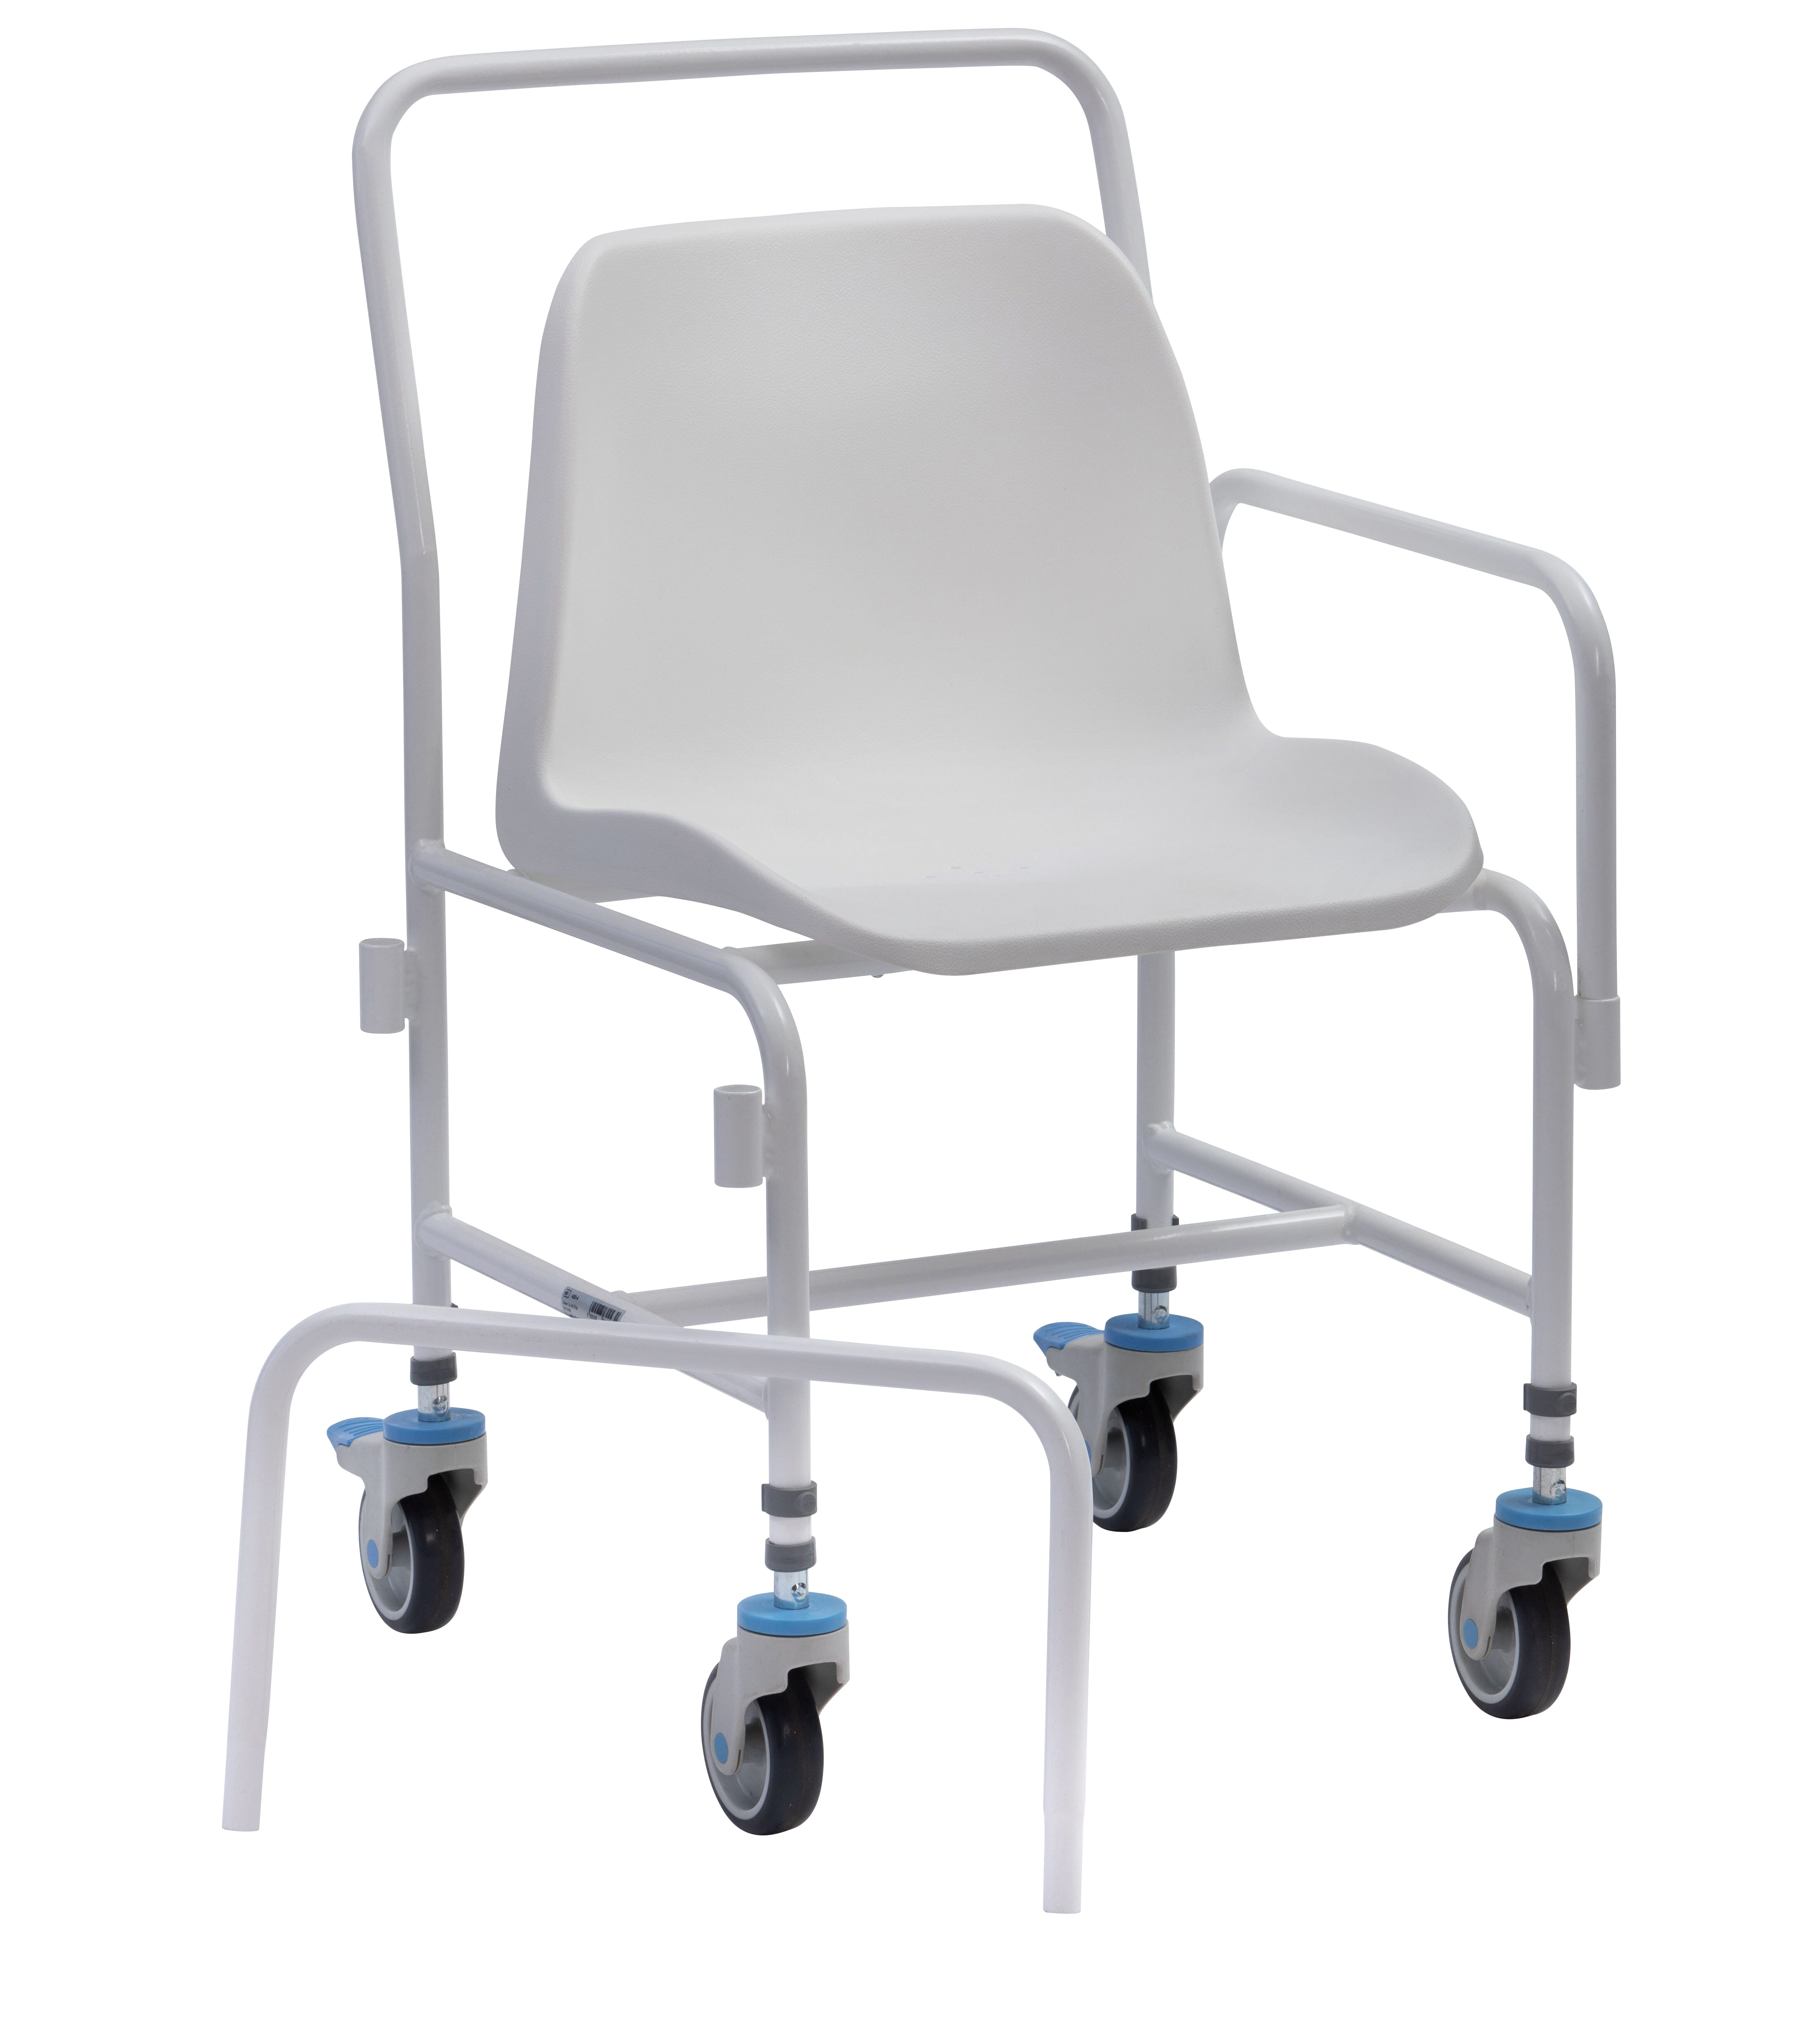 View Tilton Mobile Adjustable Height Shower Chair 2 Brake with Detachable Arms information